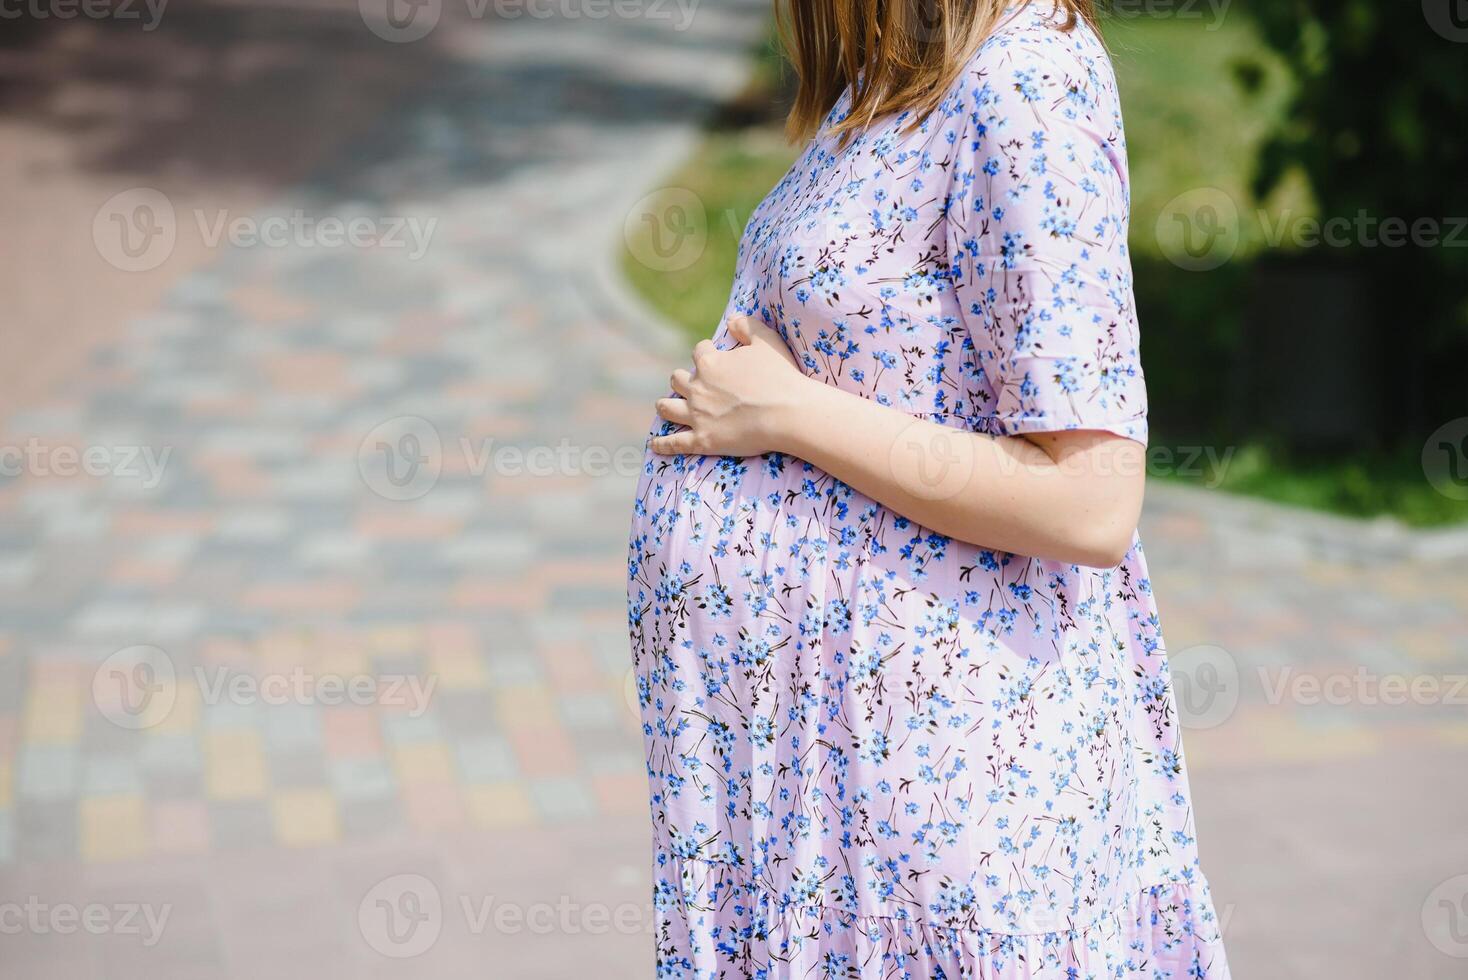 The pregnant girl on walk in city park photo